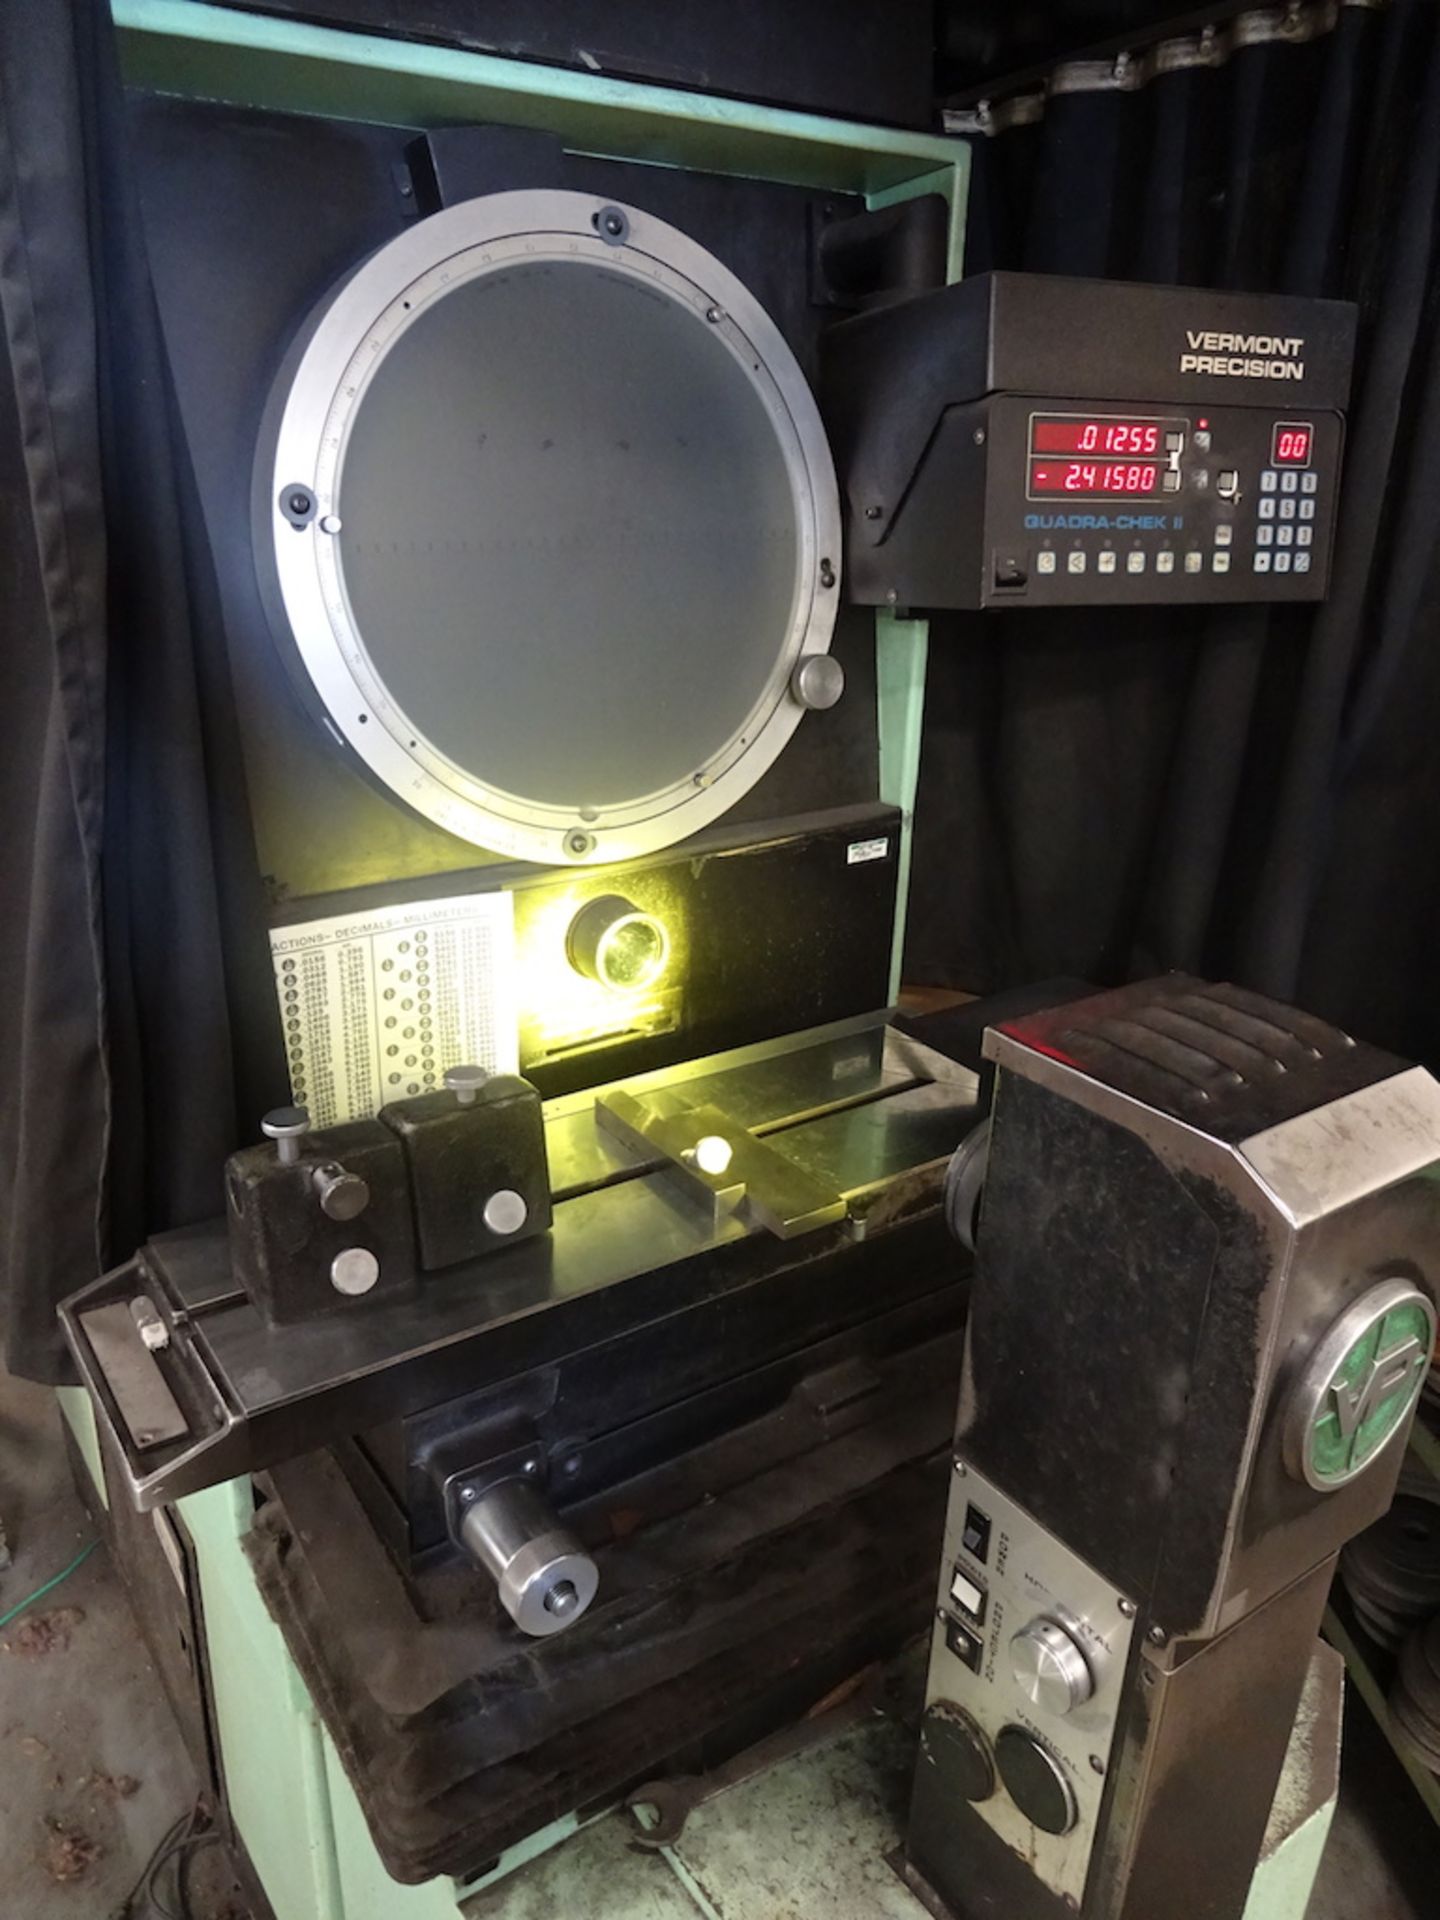 VERMONT PERCISION 15" MODEL VP-15S OPTICAL COMPARATOR: S/N 15S-0004; W/Quadra-Chek II 2-Axis Digital - Image 2 of 2